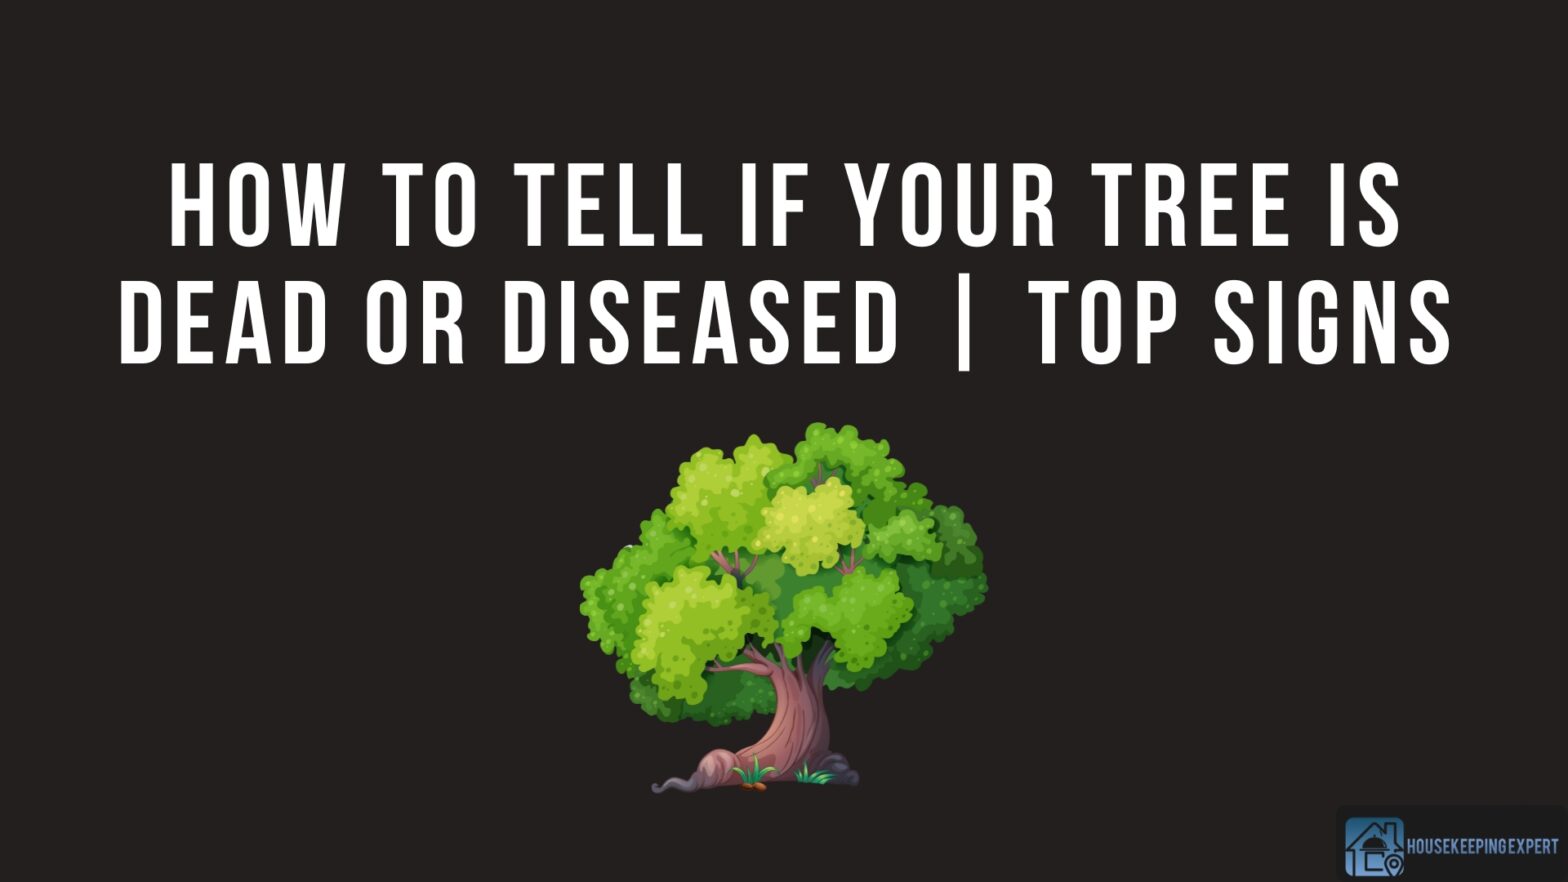 How To Tell If Your Tree Is Dead Or Diseased Top Signs